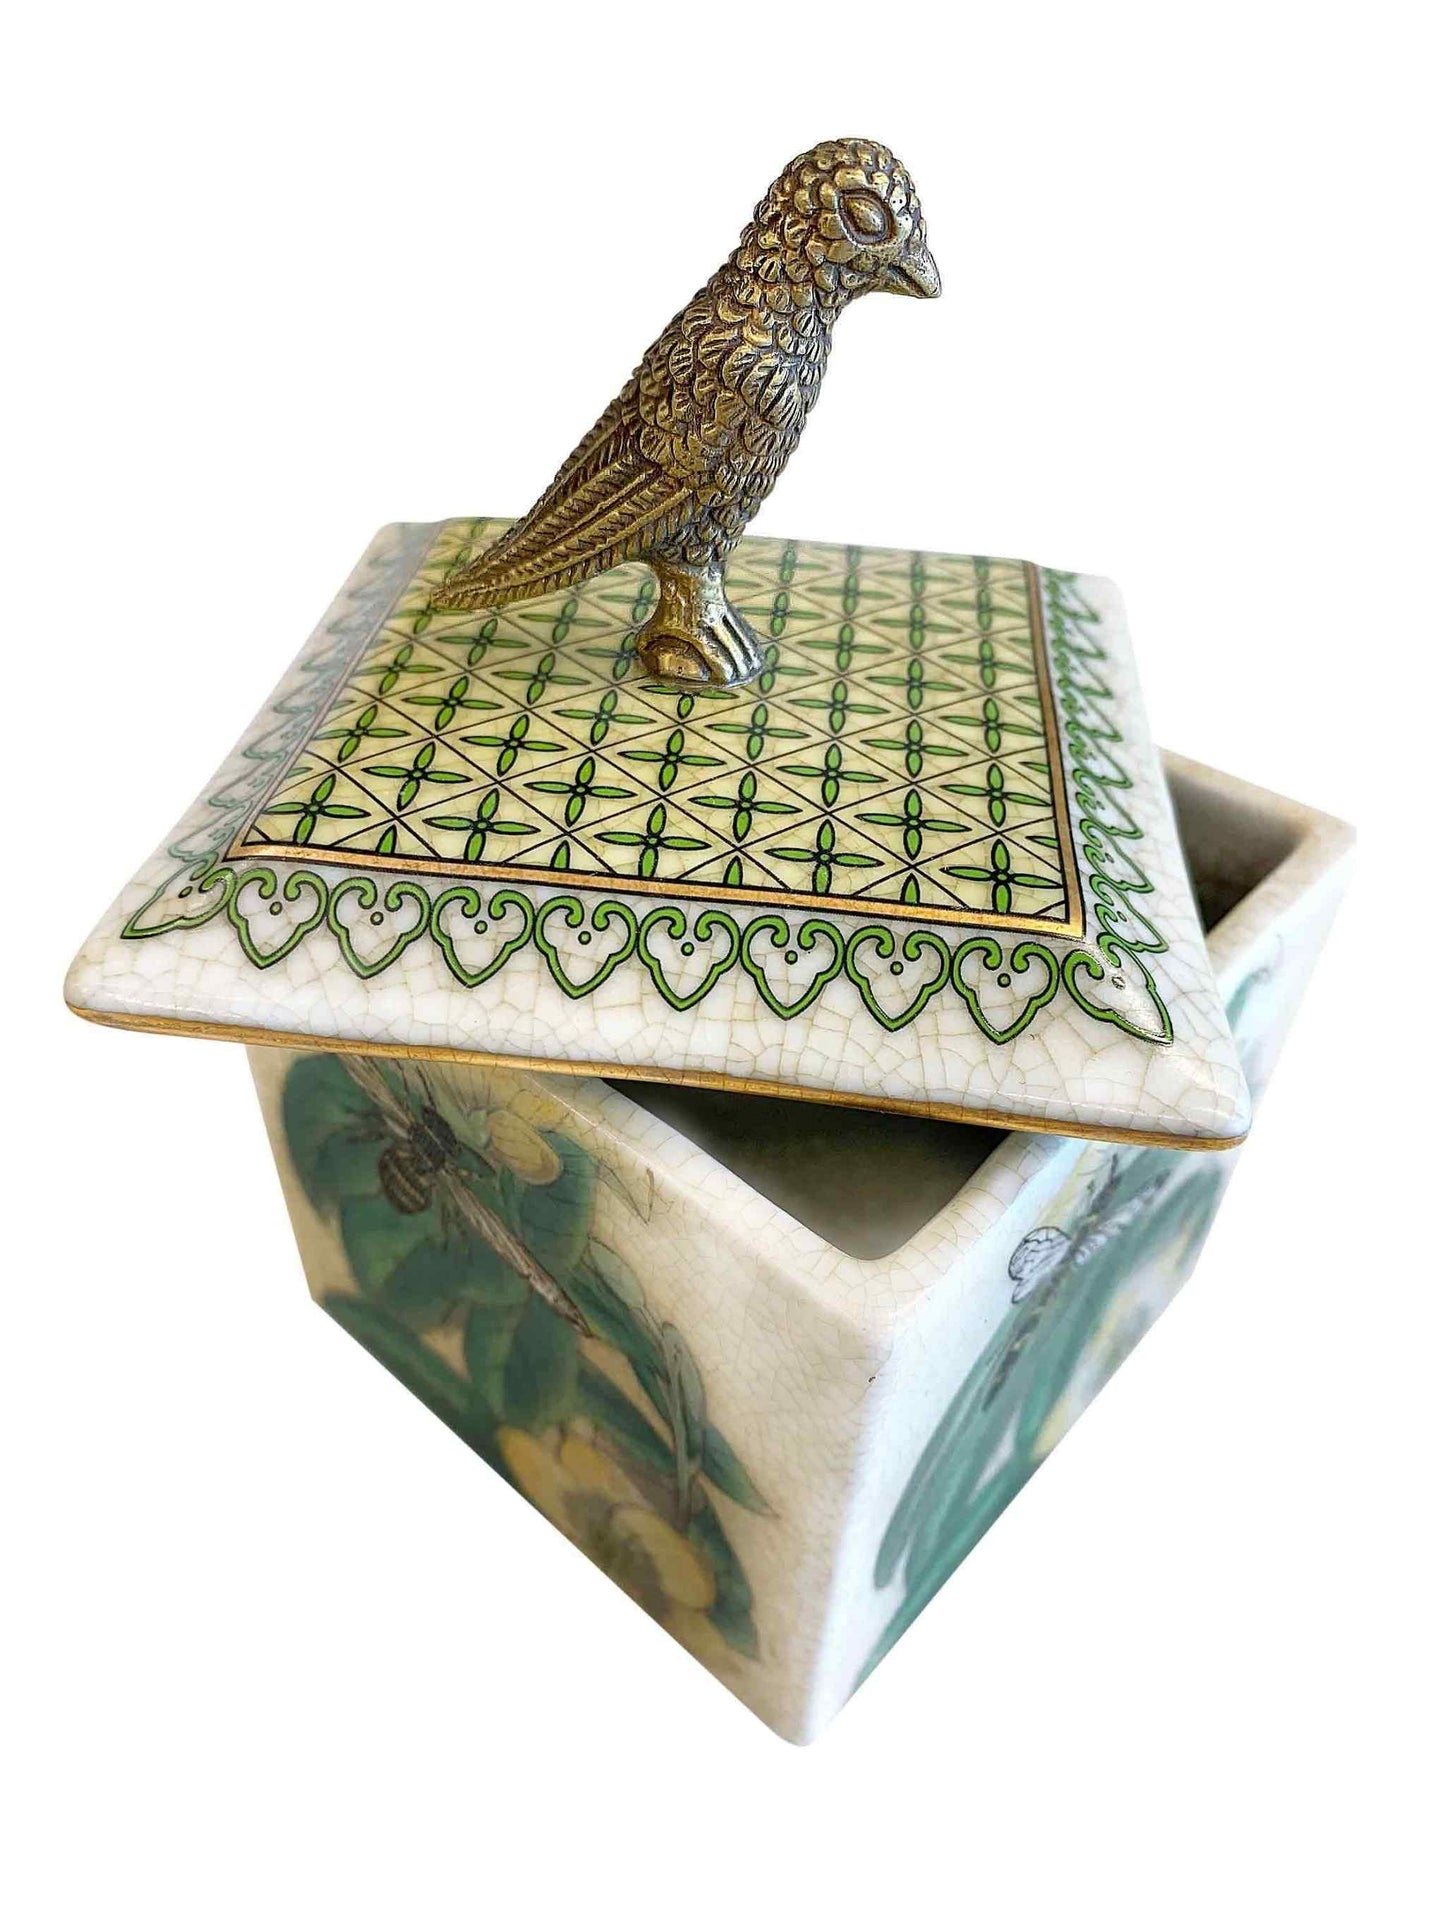 Porcelain Trinket Box Heirloom with Brass Bird Lid by C.A.M